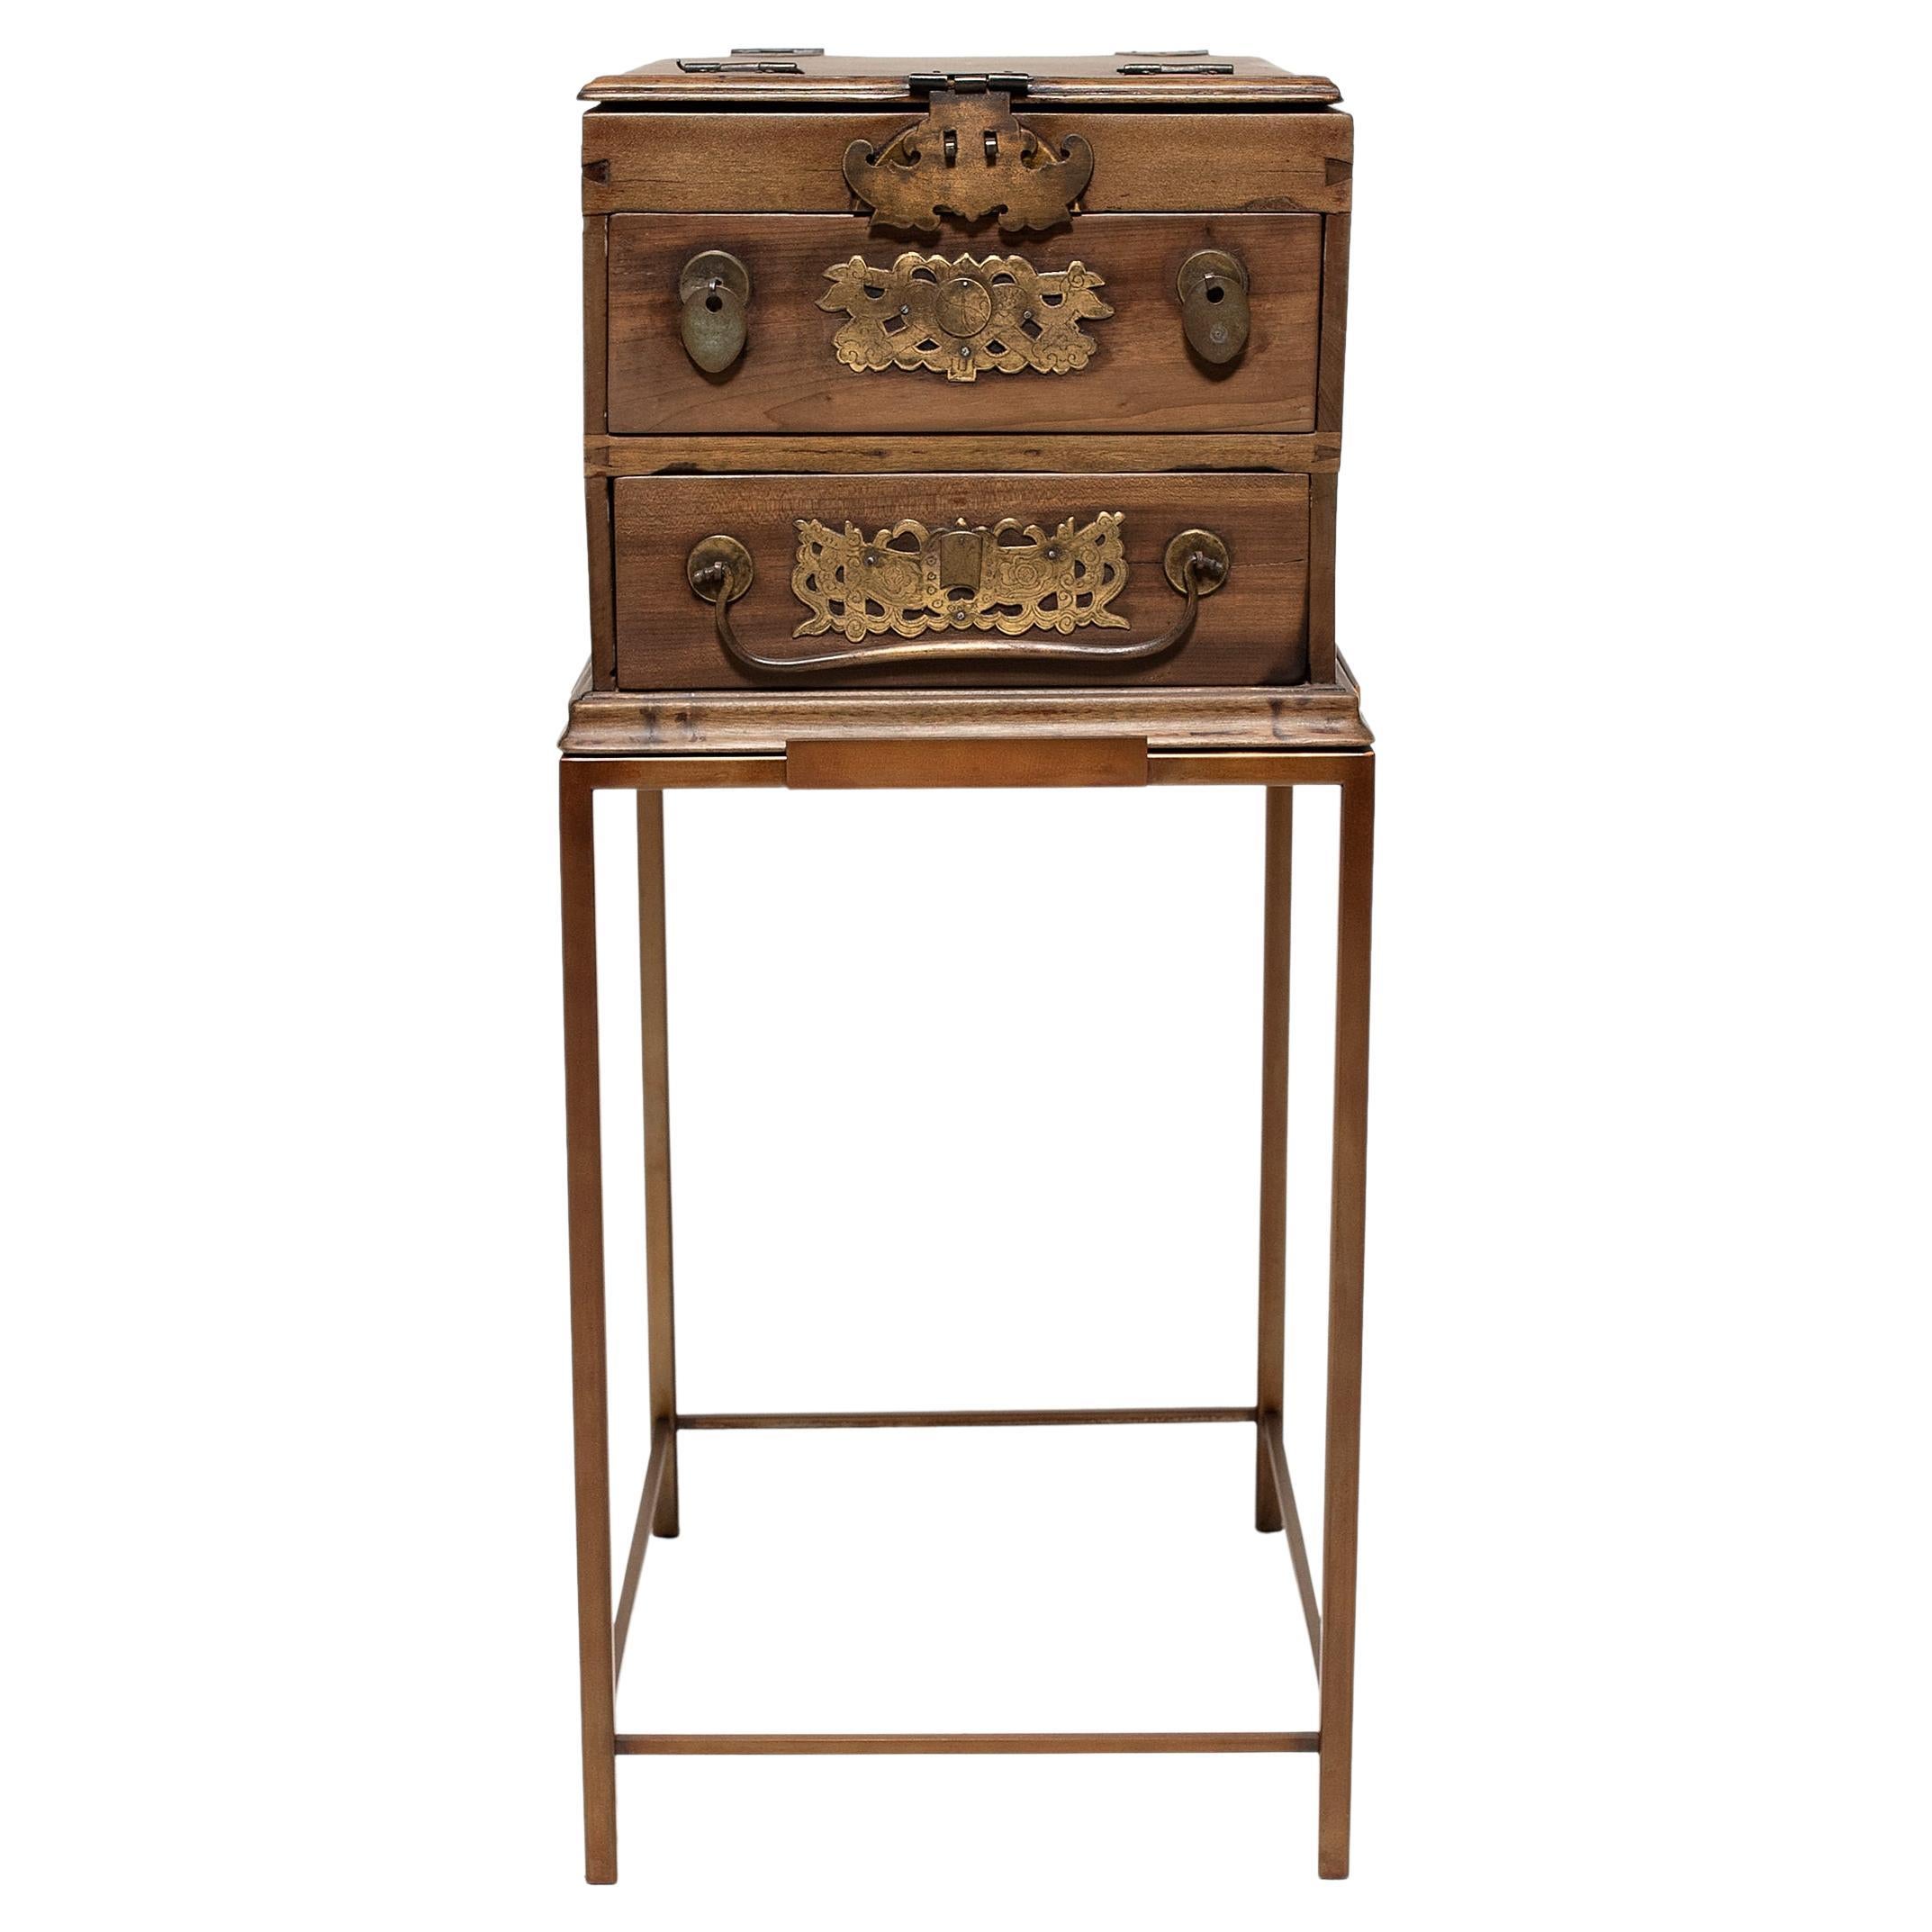 Chinese Jewelry Box Side Table, c. 1900